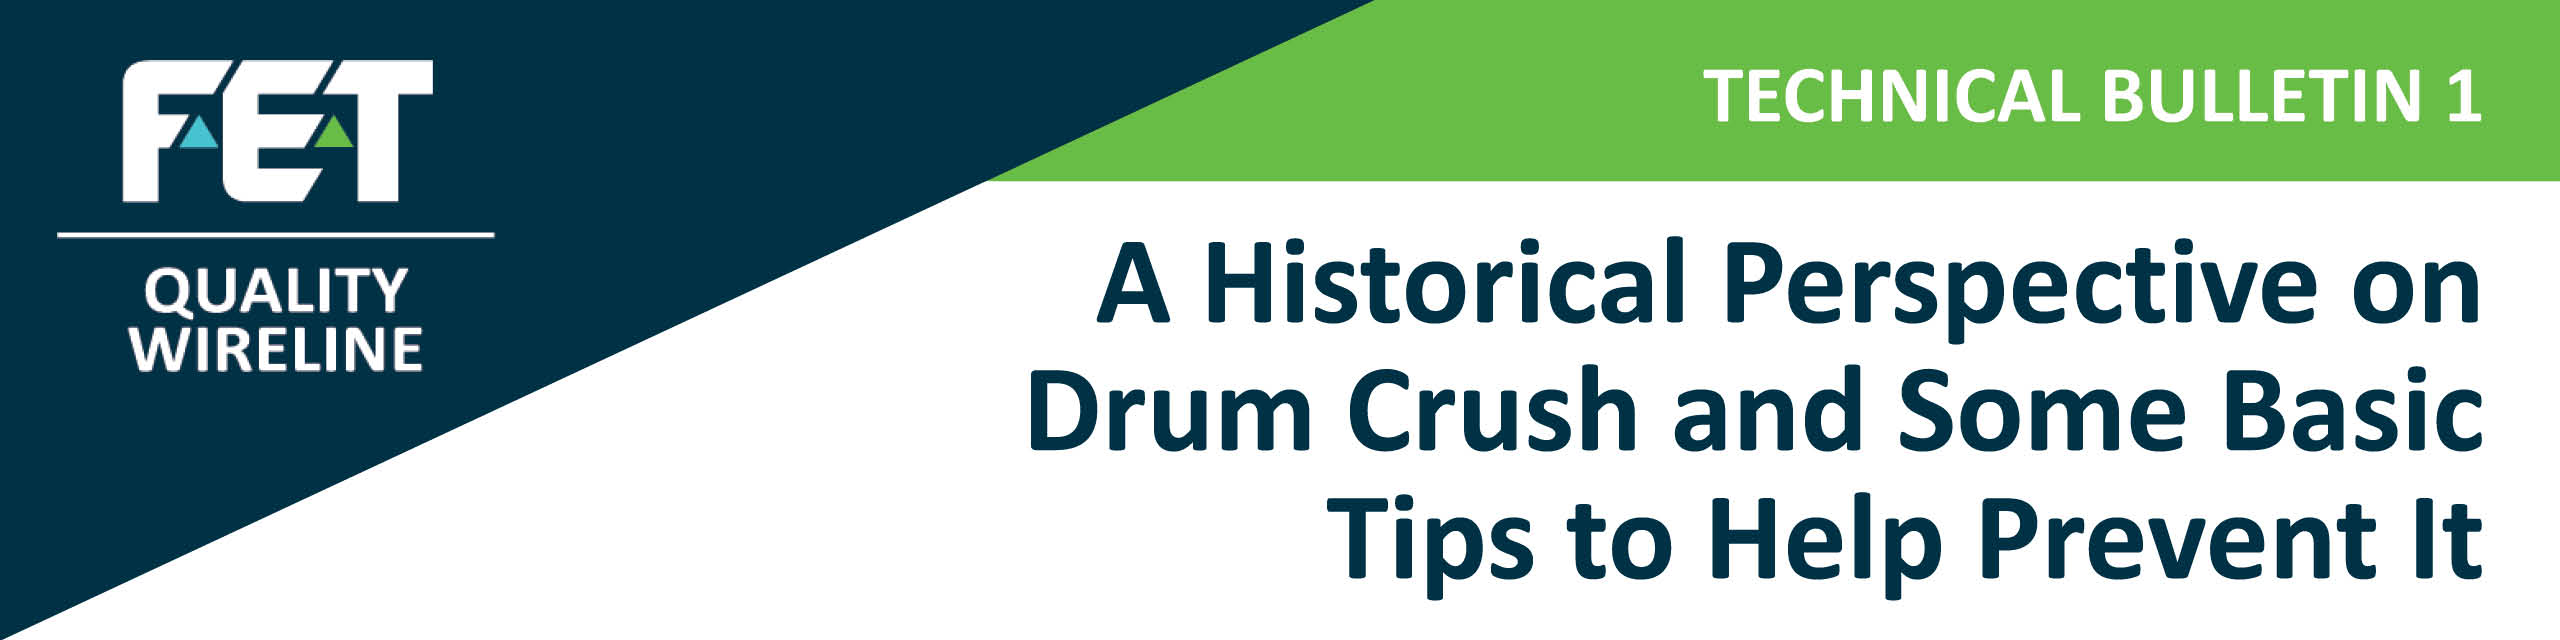 Tech Bulletin 1 ― Drum Crush History and Prevention Tips